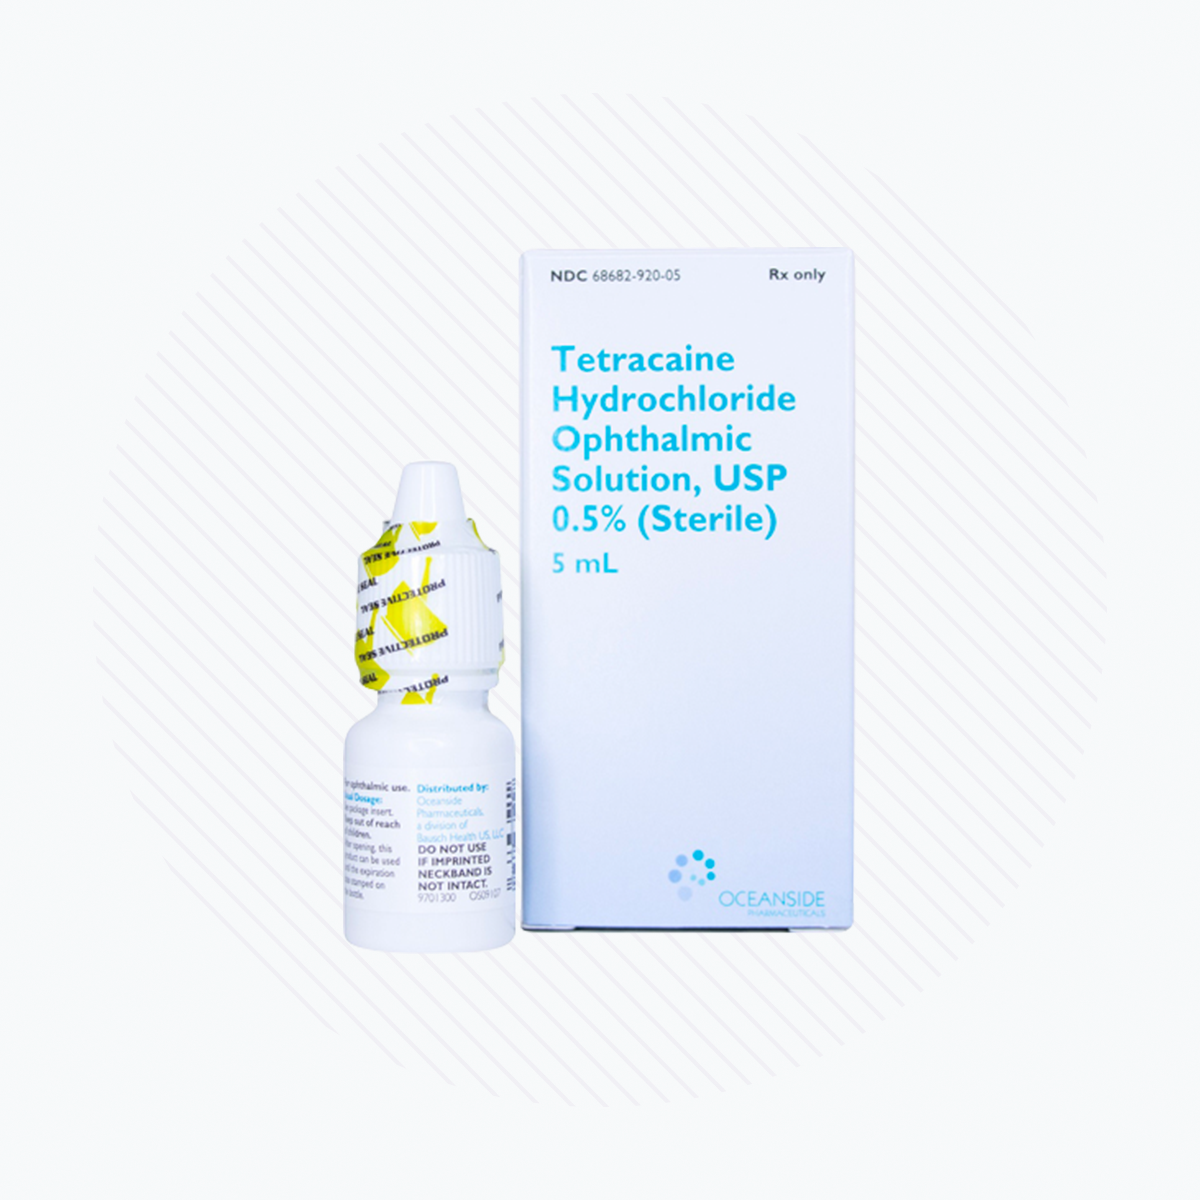 Tetracaine Eye Drops 0.5% Ophthalmic Solution - Bausch & Lomb